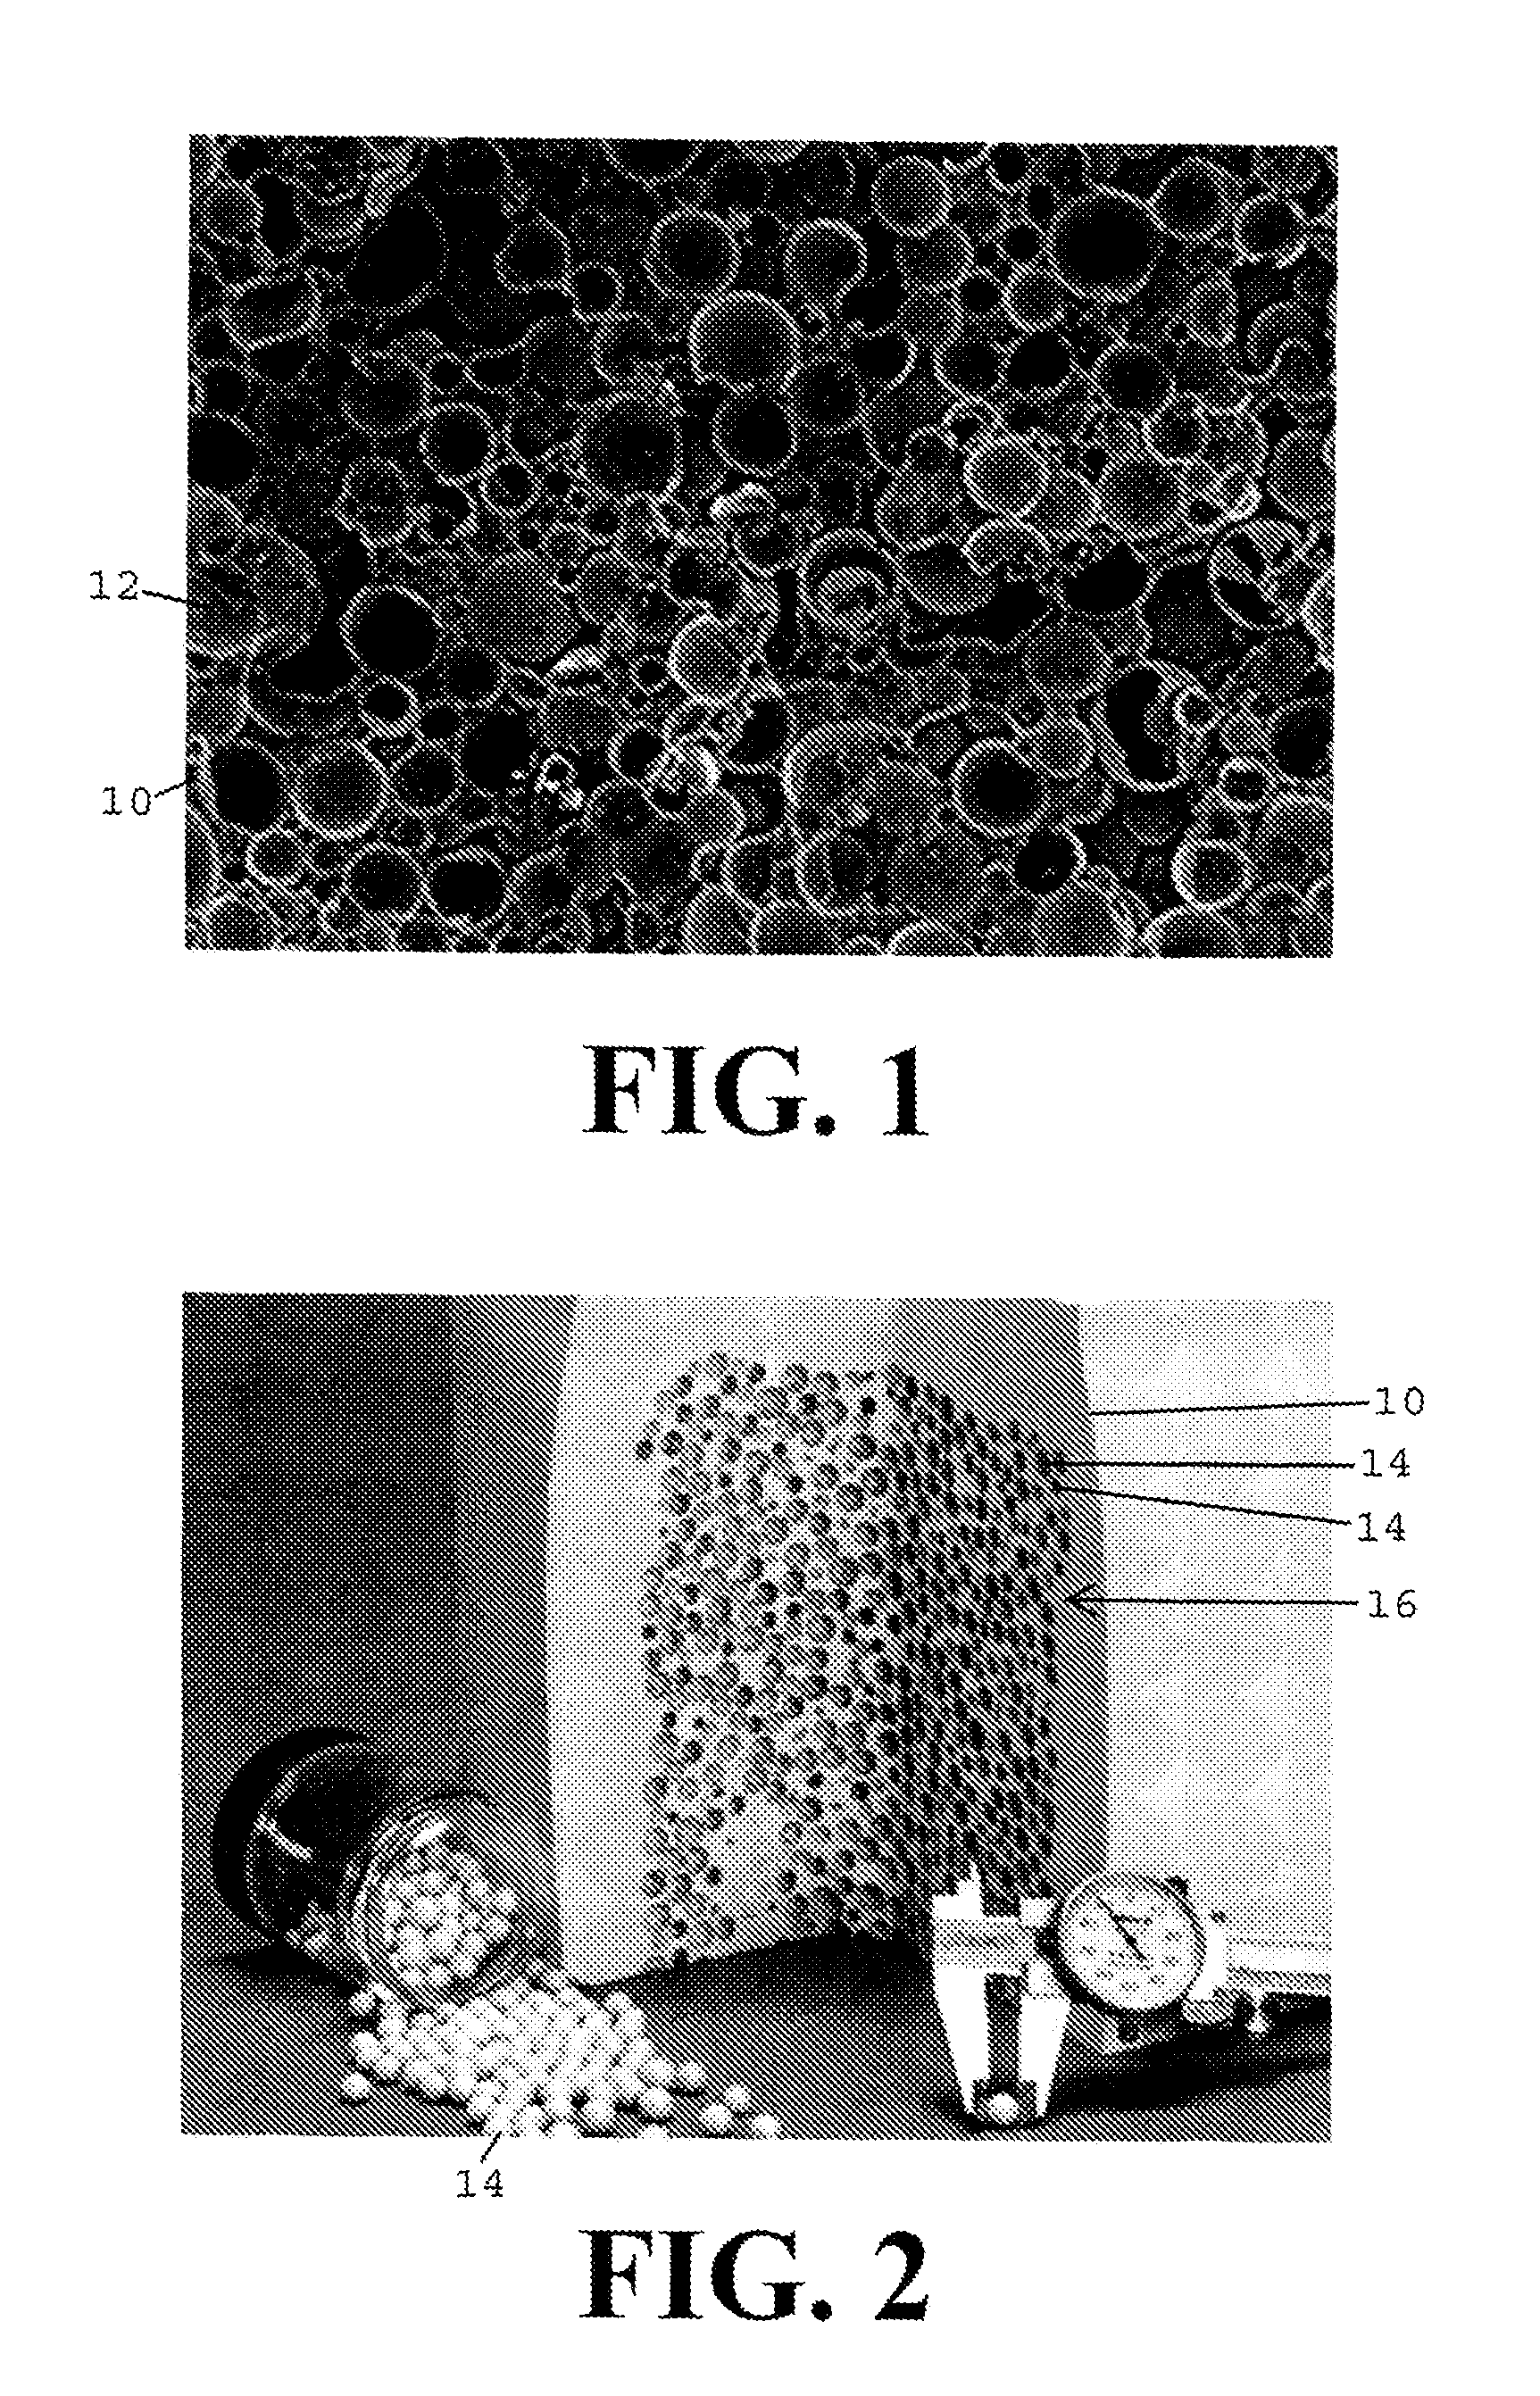 Low density subsea buoyancy and insulation material and method of manufacturing